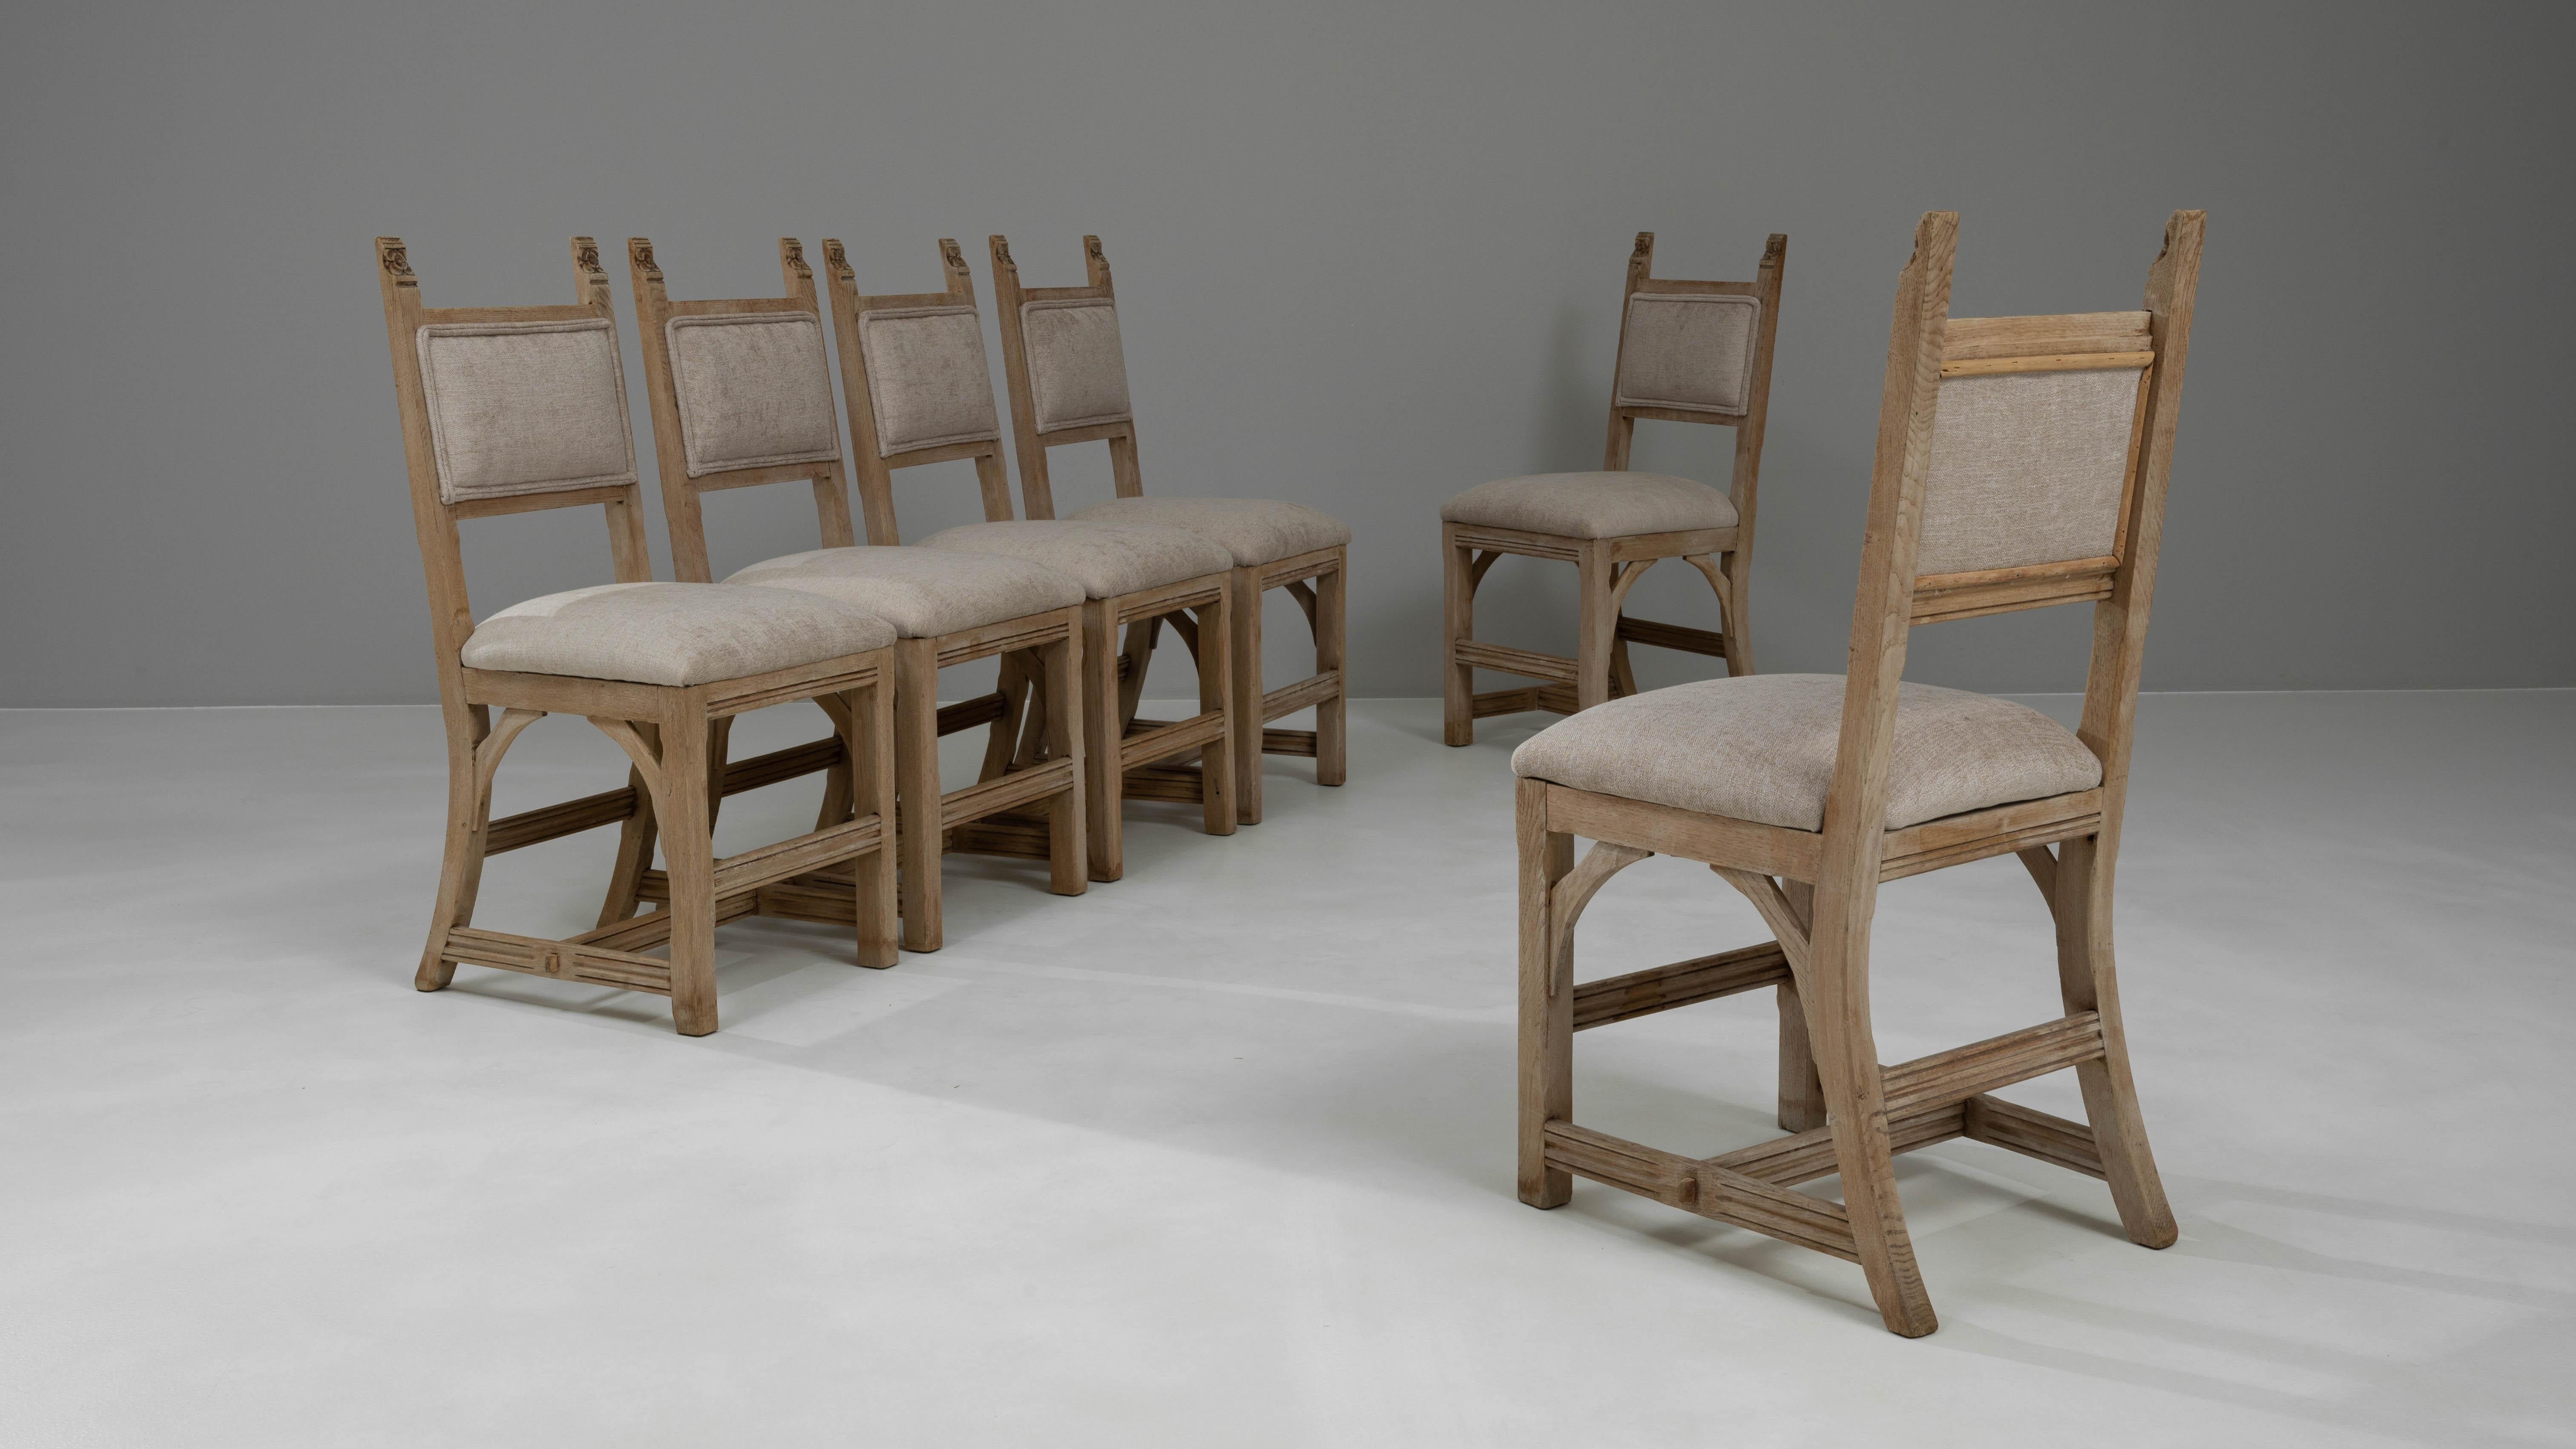 20th Century French Bleached Oak Dining Chairs With Upholstered Seats, Set of 6 In Good Condition For Sale In High Point, NC